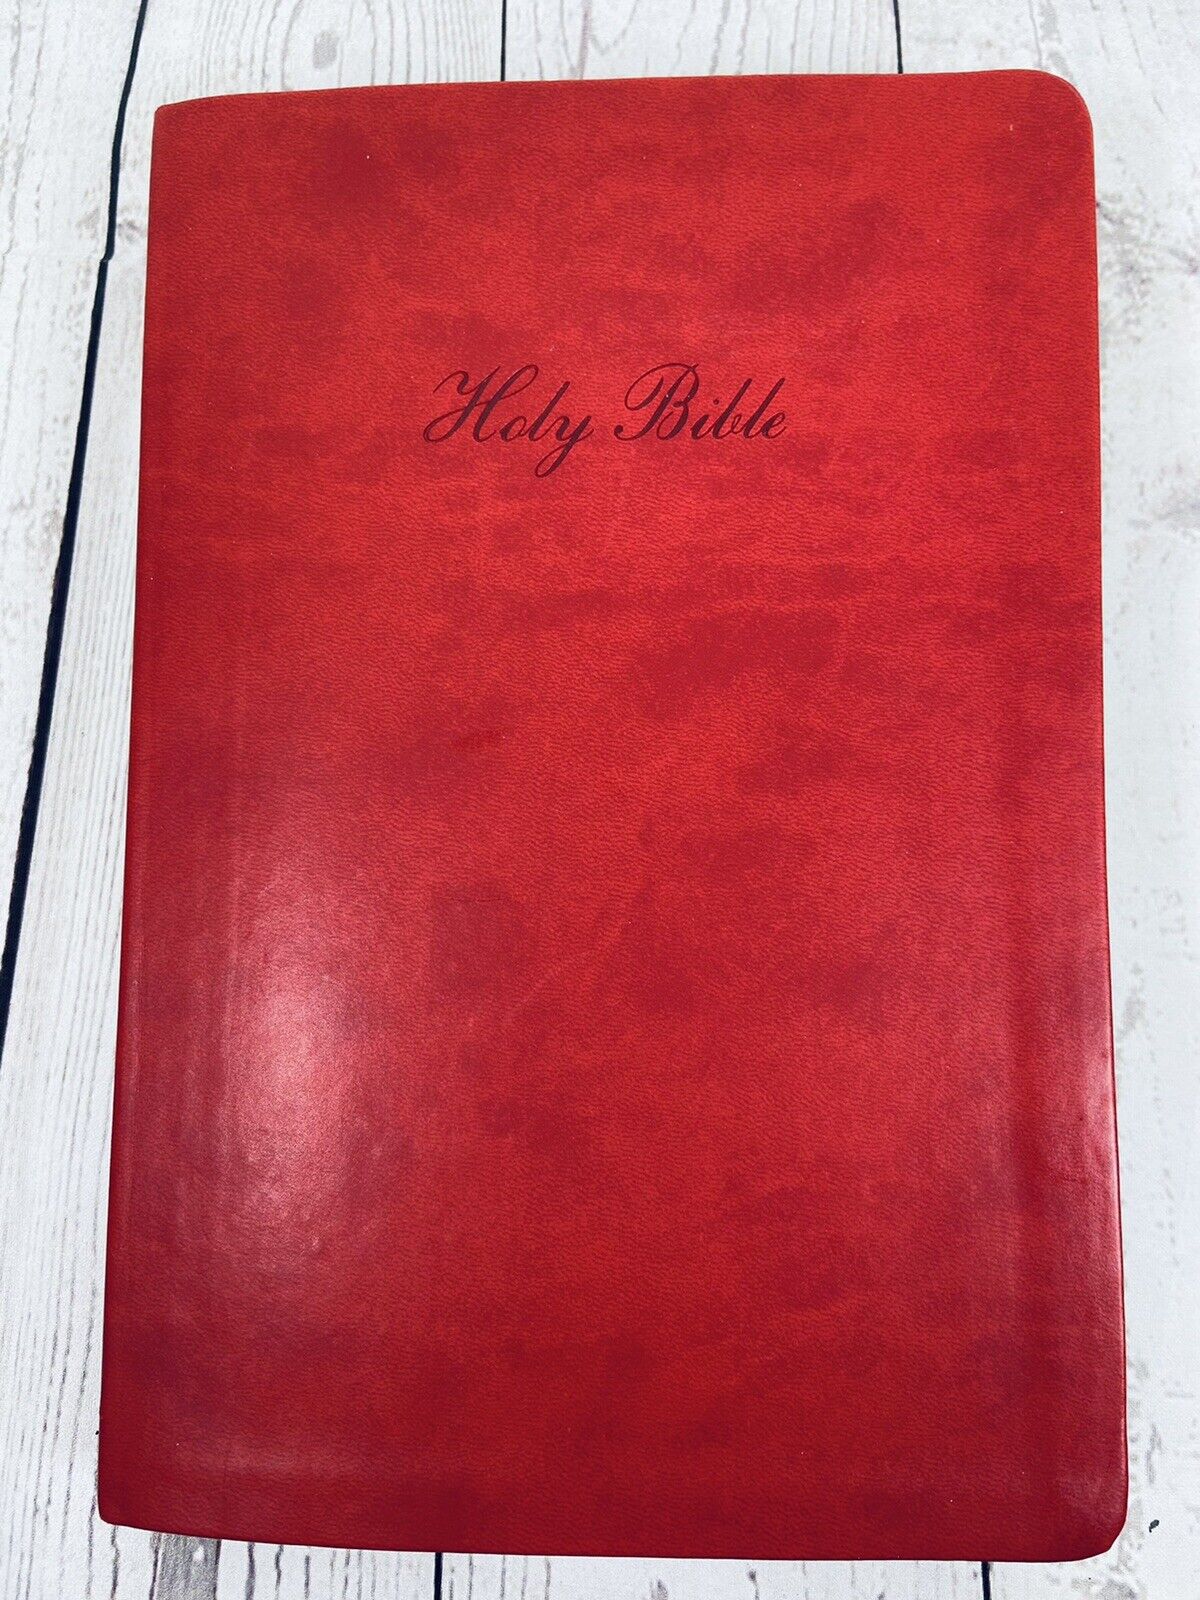 2006 Nelson NKJV Holy Bible Giant Print Edition Red Lettered Faux Red Leather 